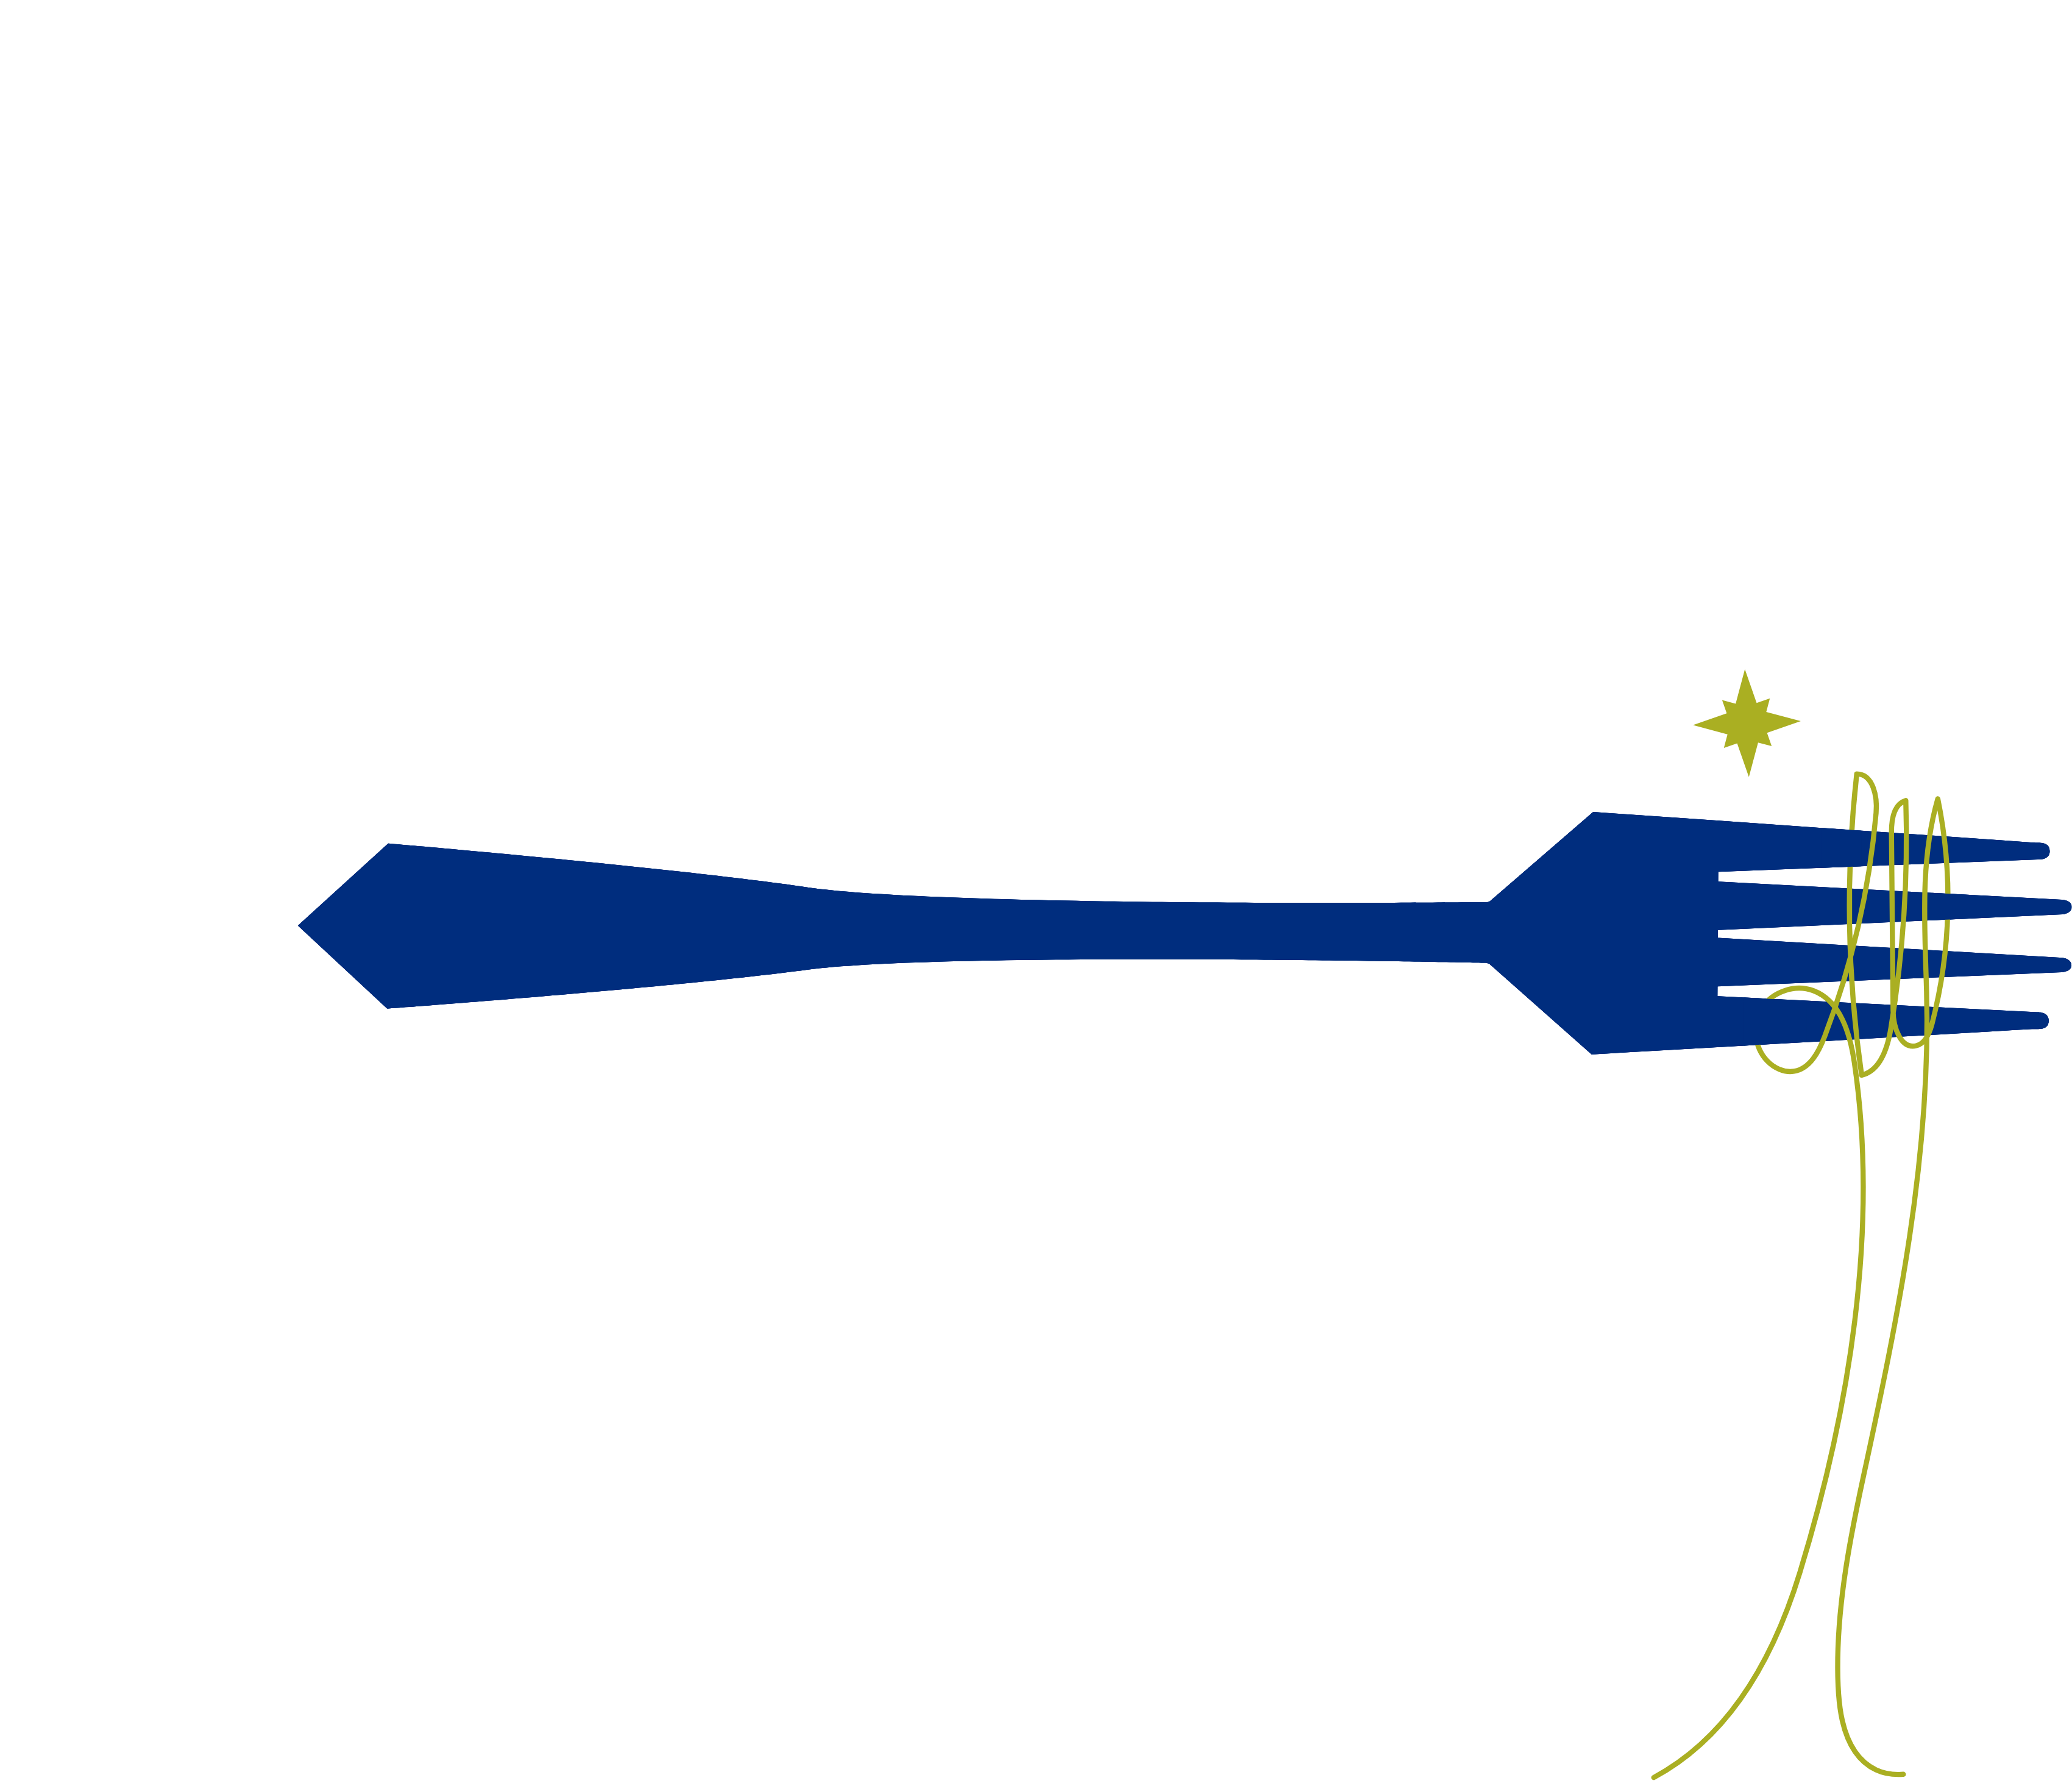 Illustration of a blue fork with a spaghetti noodle tangled around its tines